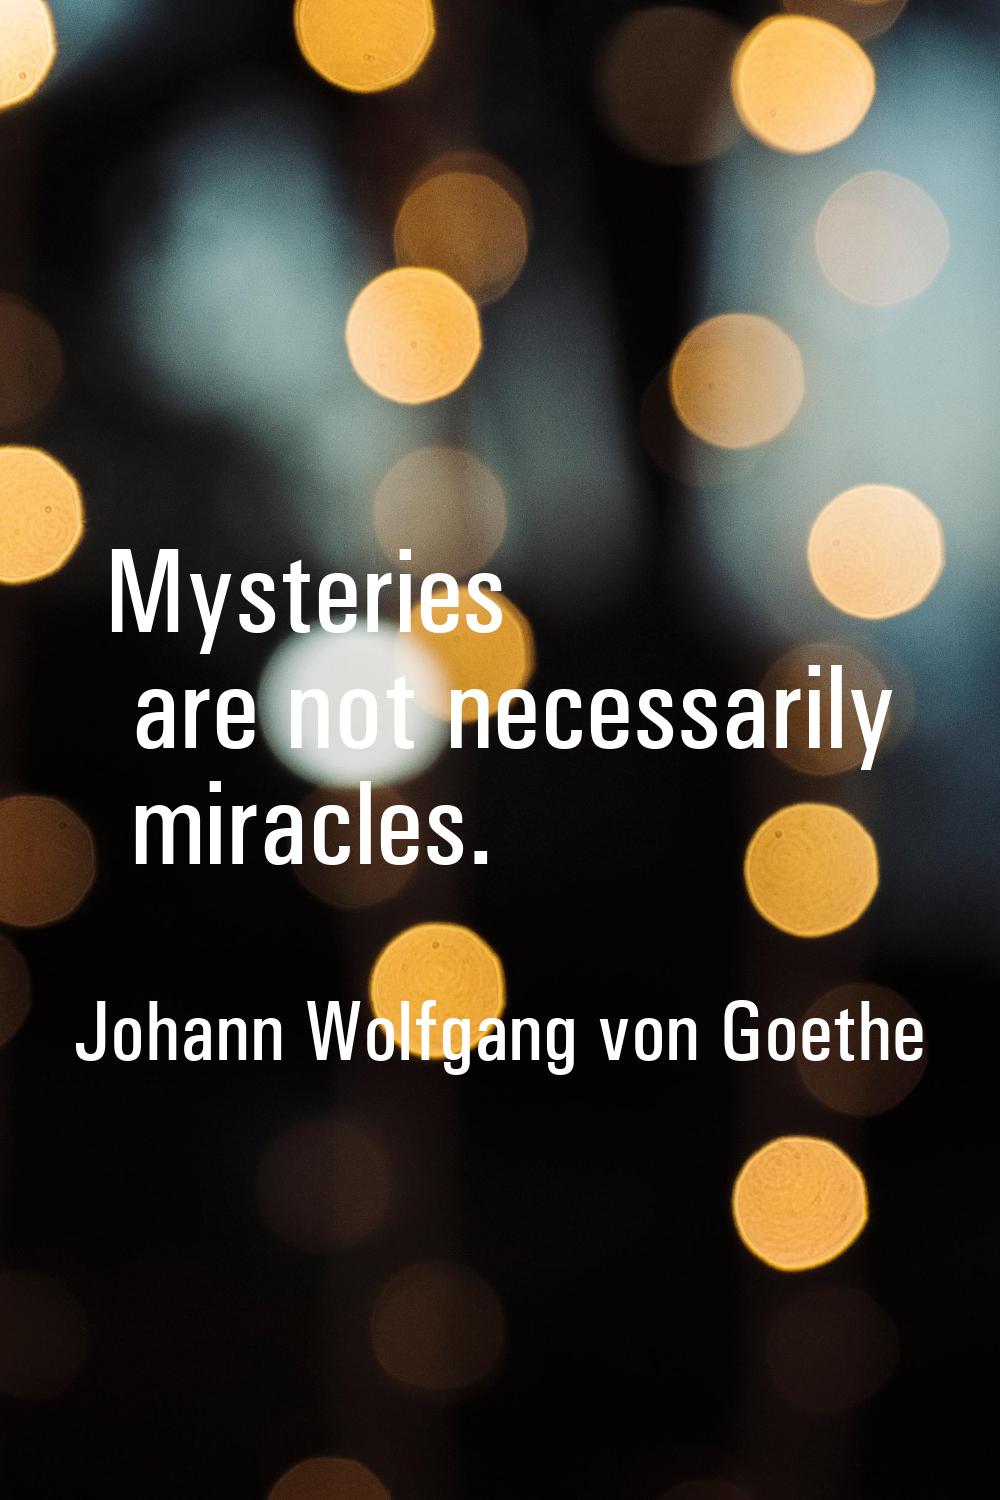 Mysteries are not necessarily miracles.